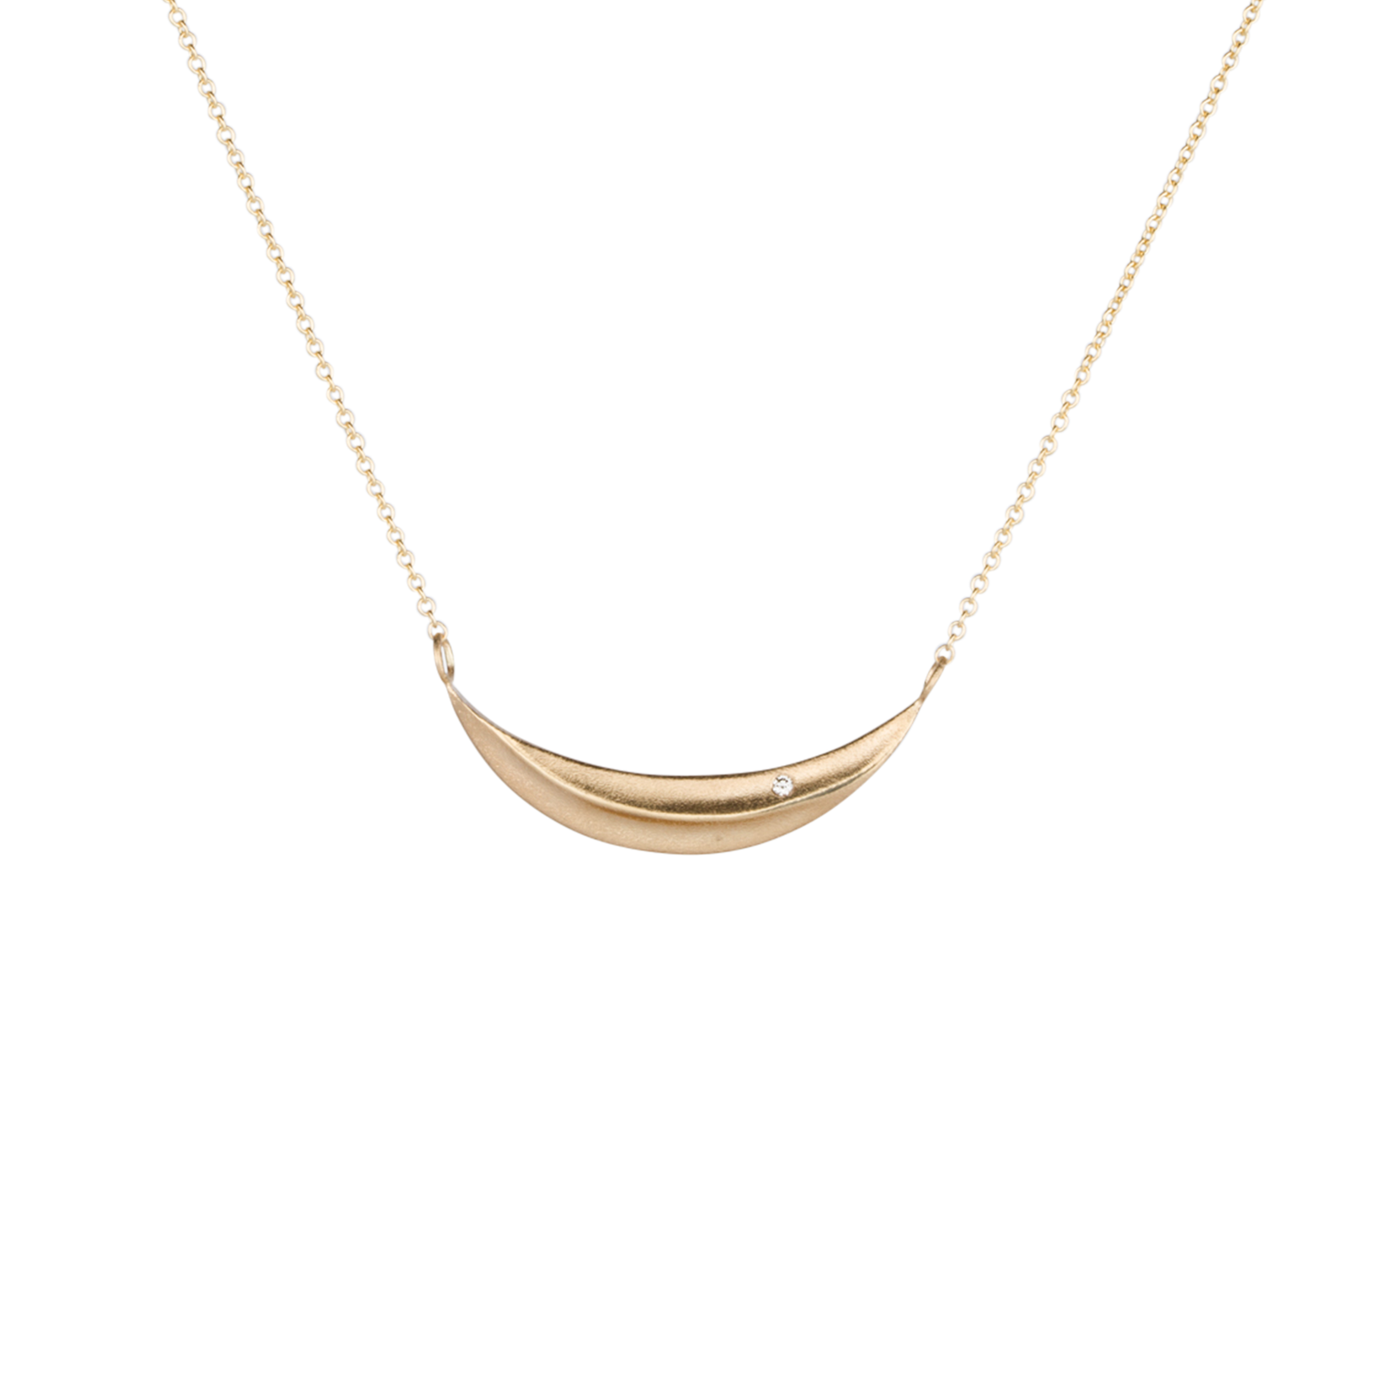 Gold and Diamond Wisp Necklace by Corey Egan on a white background